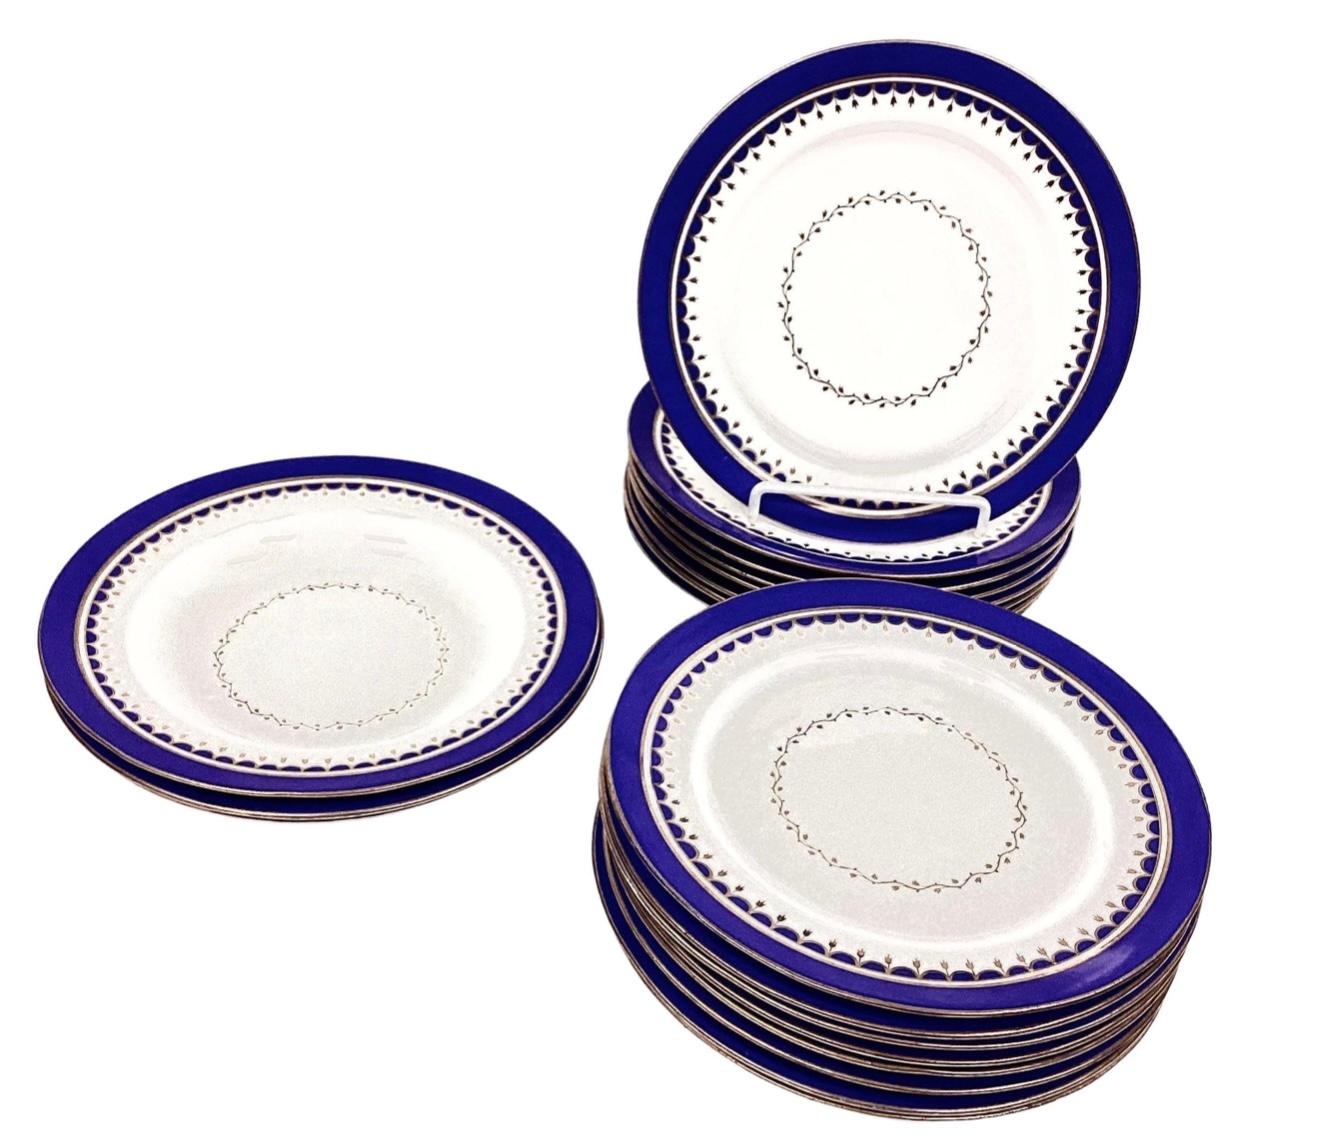 Set of early 20th century Porcelain dinner plates (16 total) and large bowls (3 total). Beautiful cobalt blue on edge with smooth gold trim and tiny gold leaves in center. No markings on reverse side. Possibly from Russia or France. Good condition